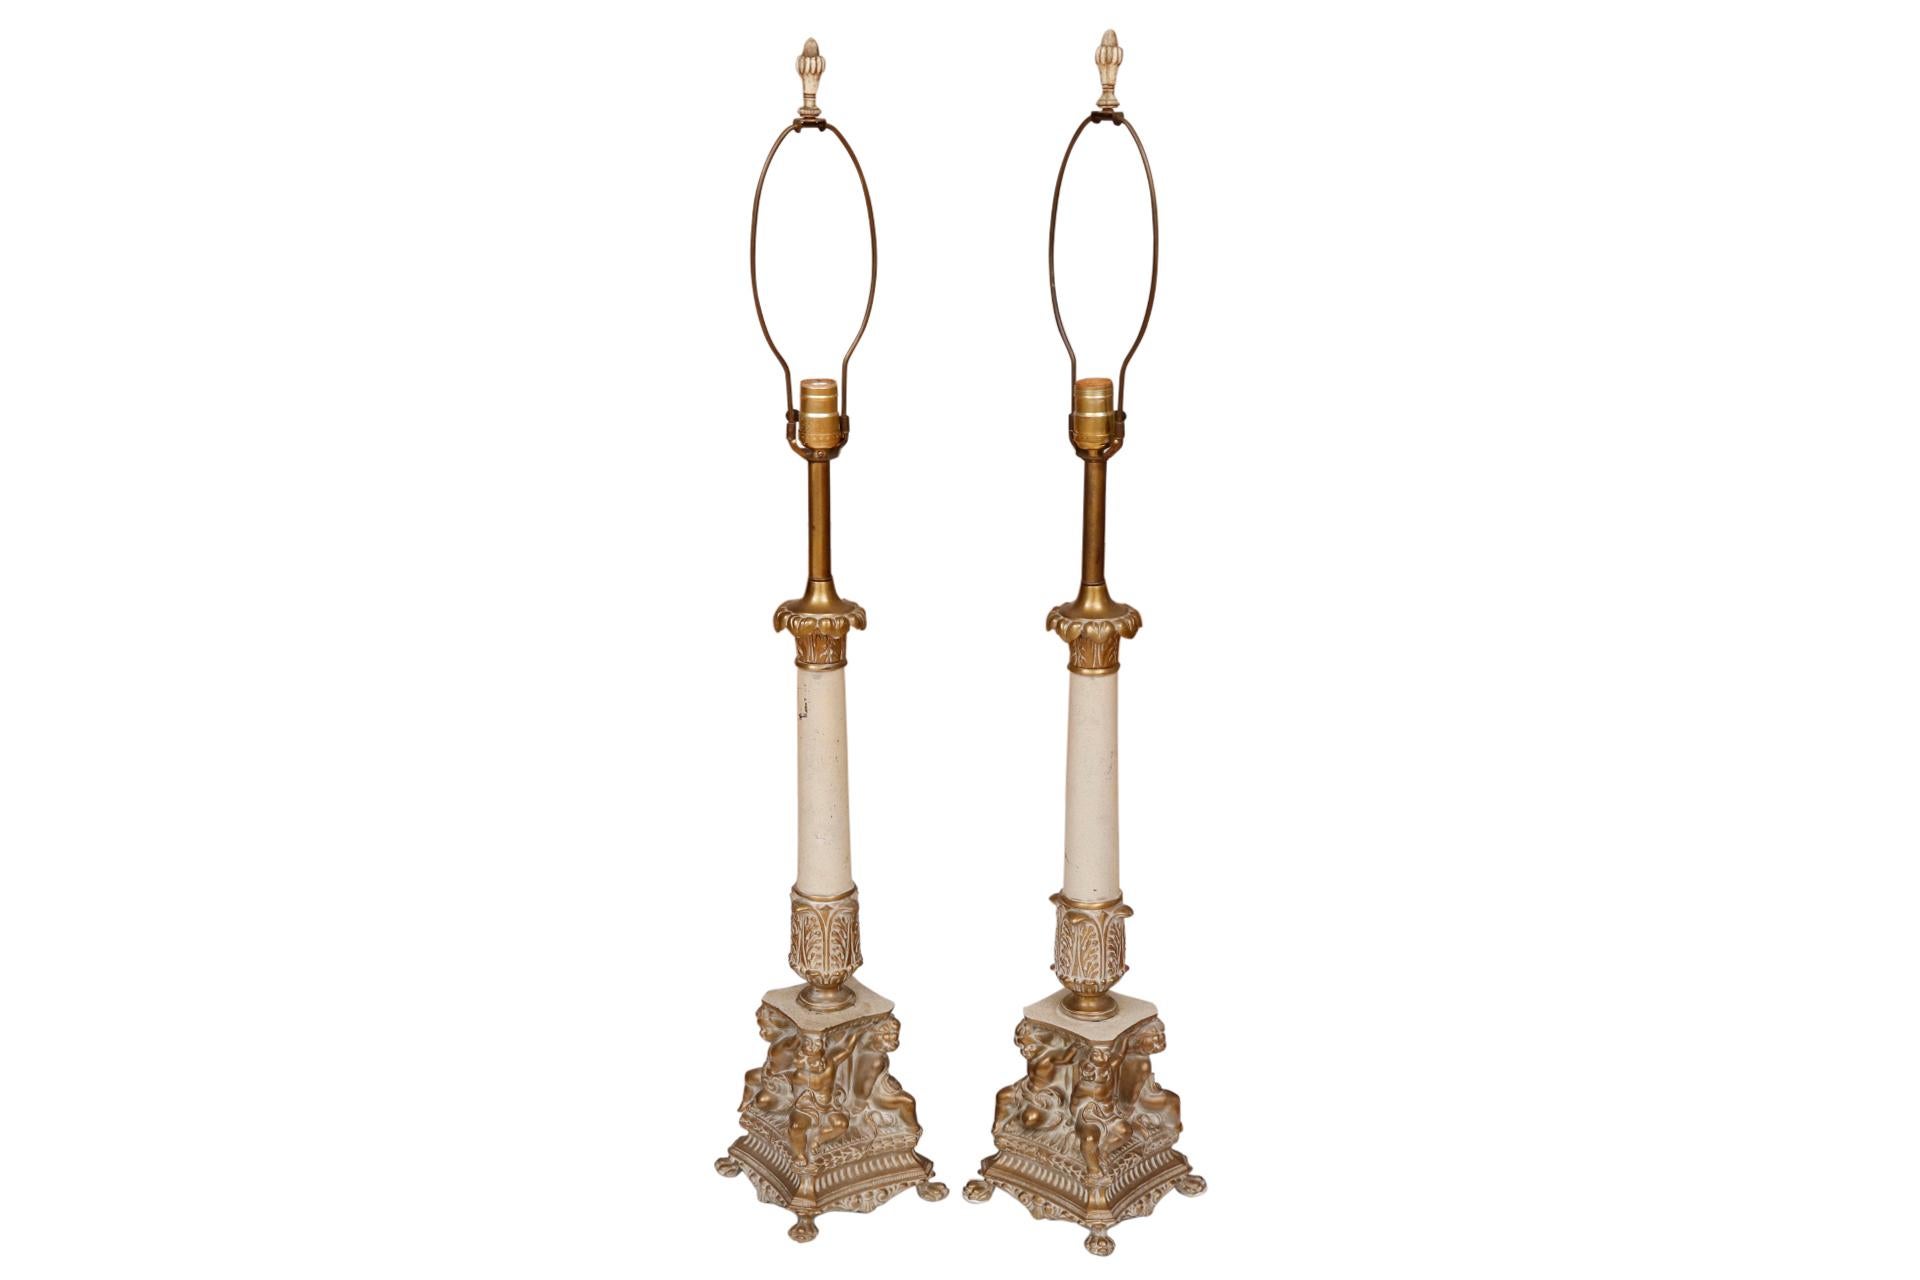 A pair of figural French Empire style table lamps. White metal columns are topped with cast acanthus plumes and finished with palms at the base. Square bases are decorated with four cherubs, one on each corner, cast to look as though they're